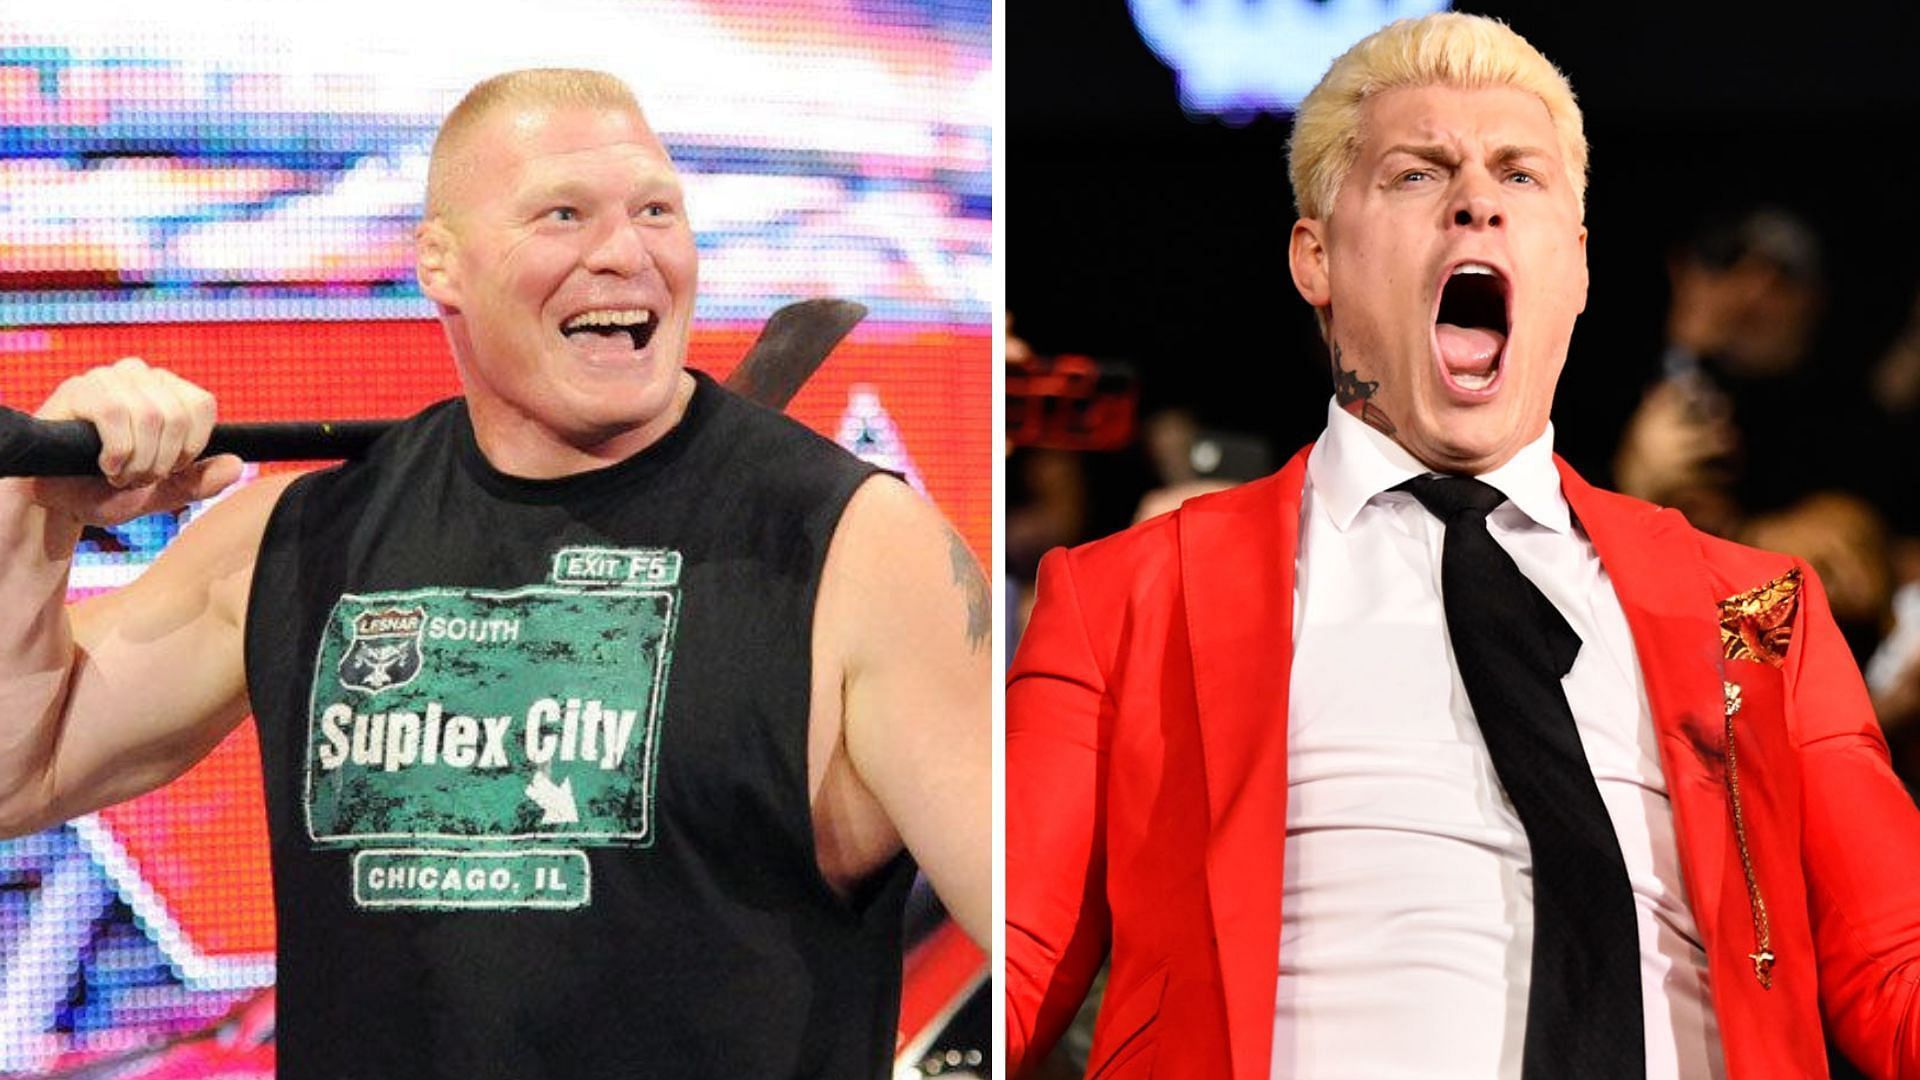 Cody Rhodes and Brock Lesnar are currently in a rivalry.